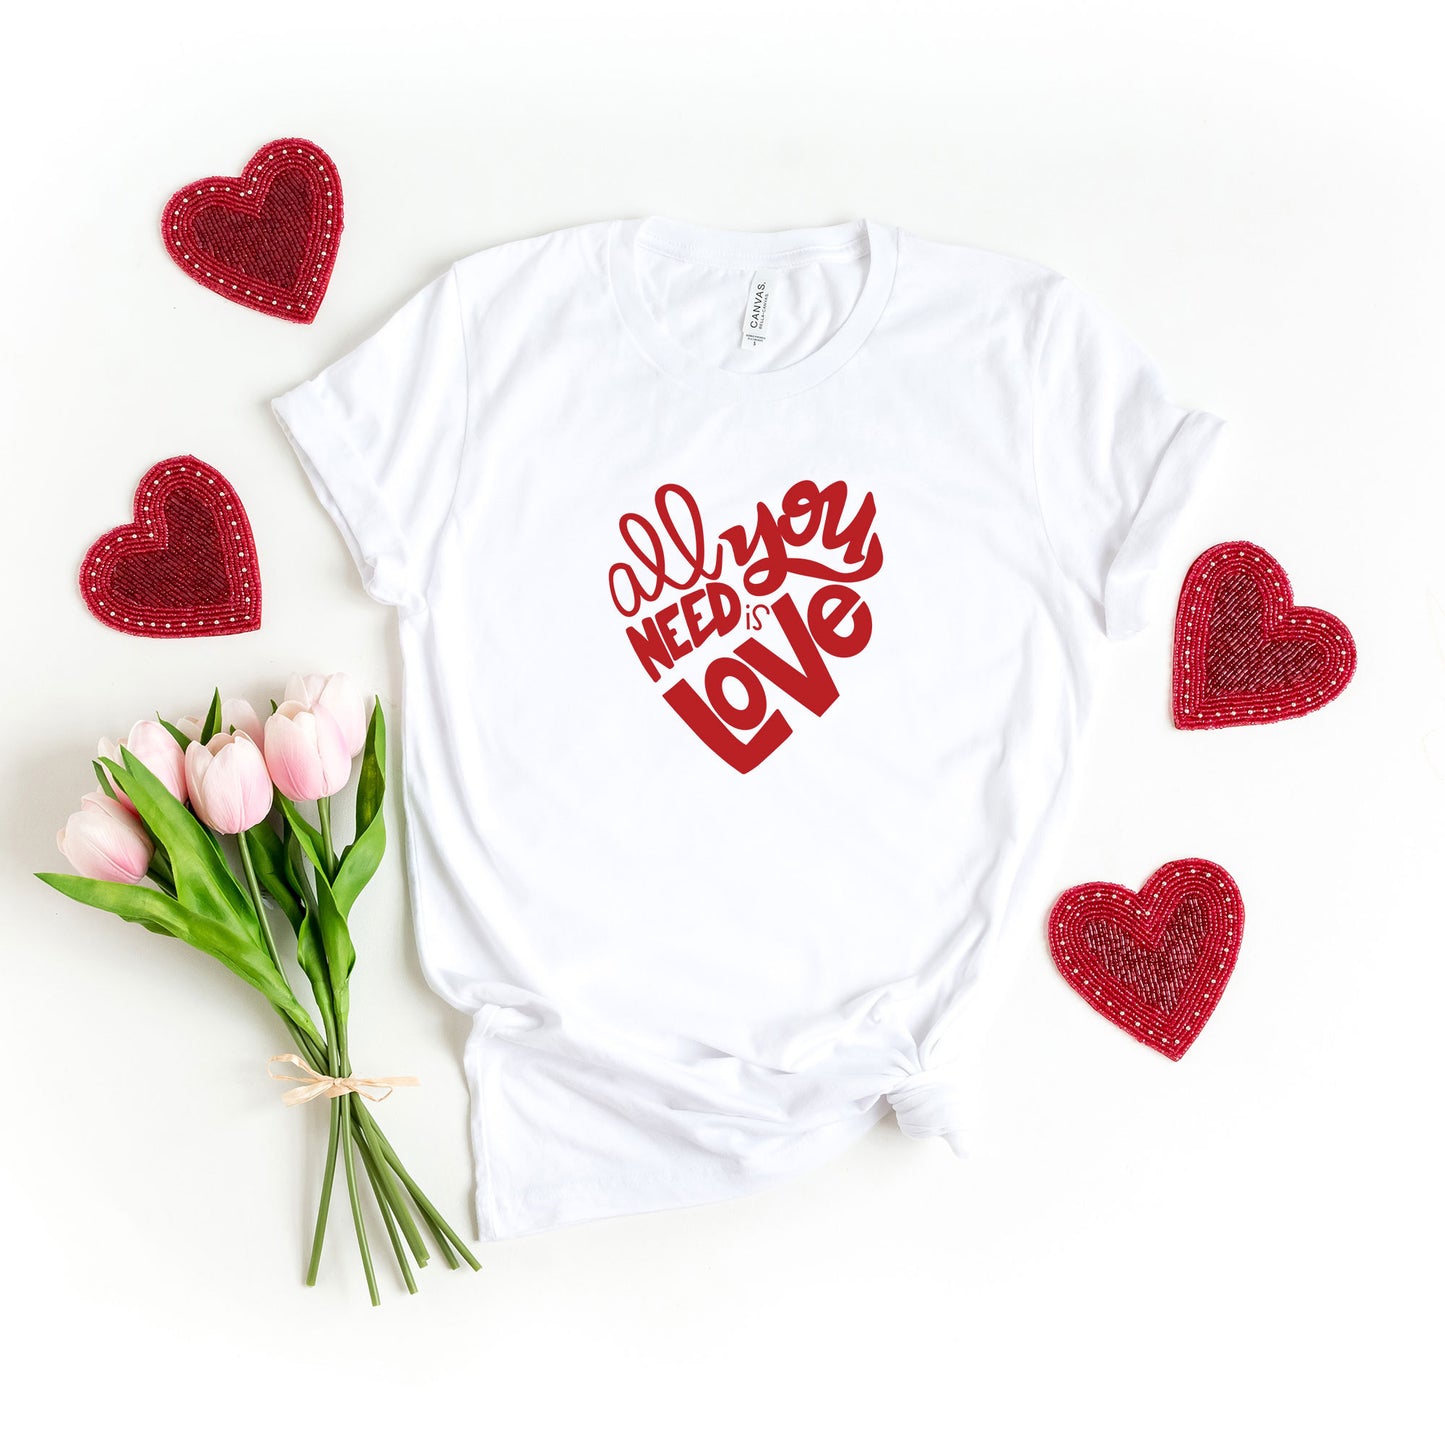 All You Need Is Love | Short Sleeve Graphic Tee